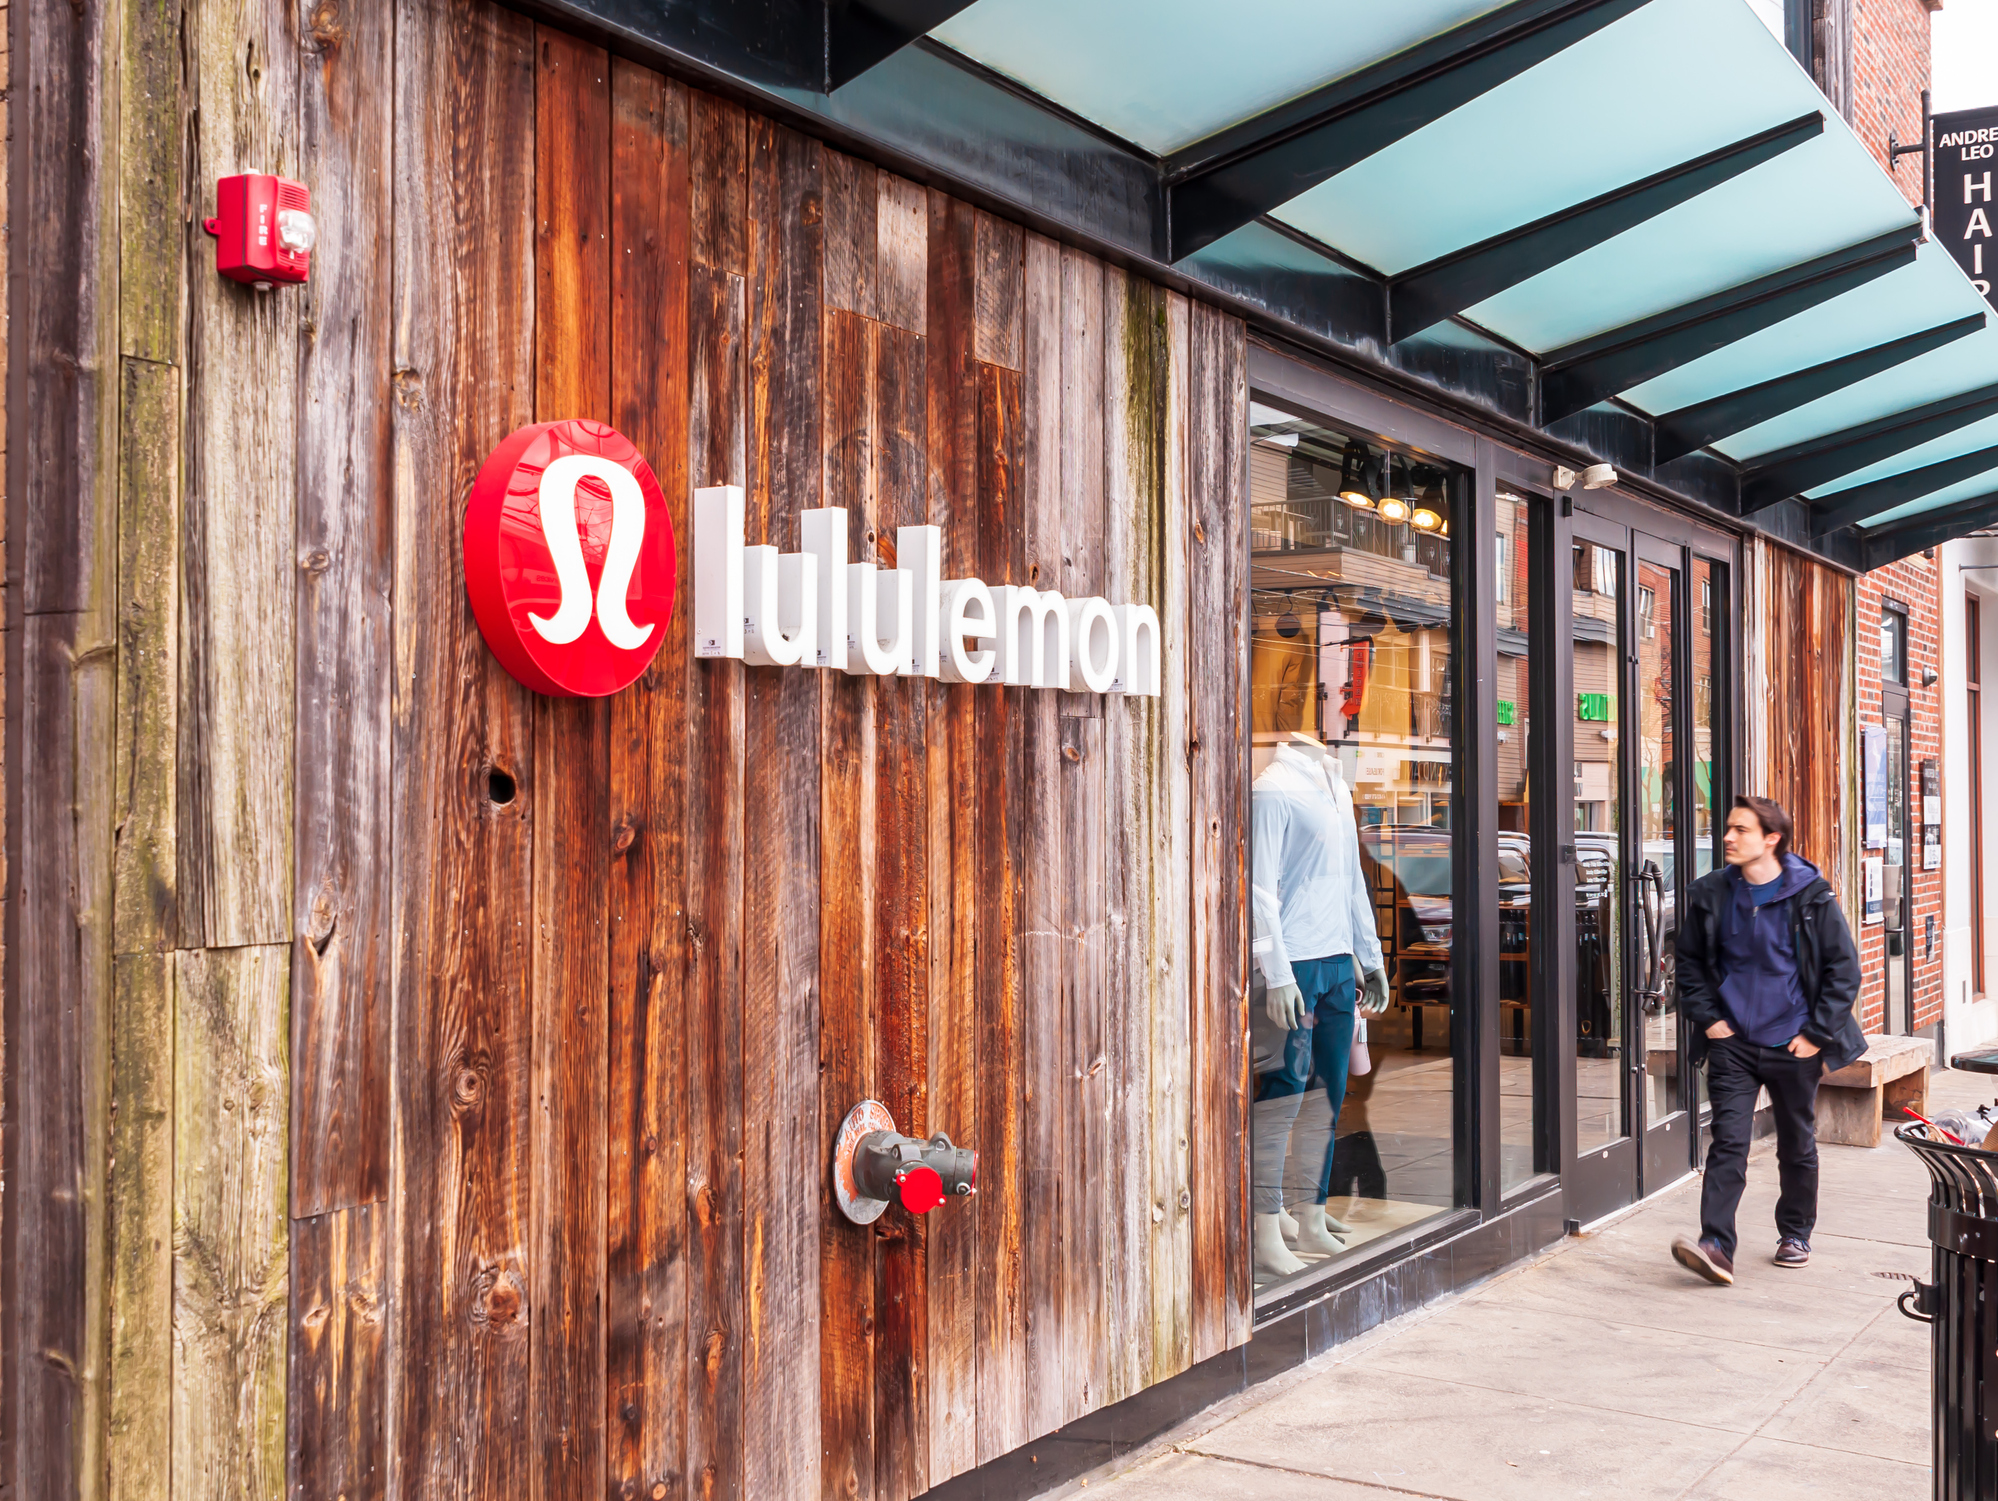 The Lululemon store on Walnut street in the Shadyside neighborhood with a man walking in front of it